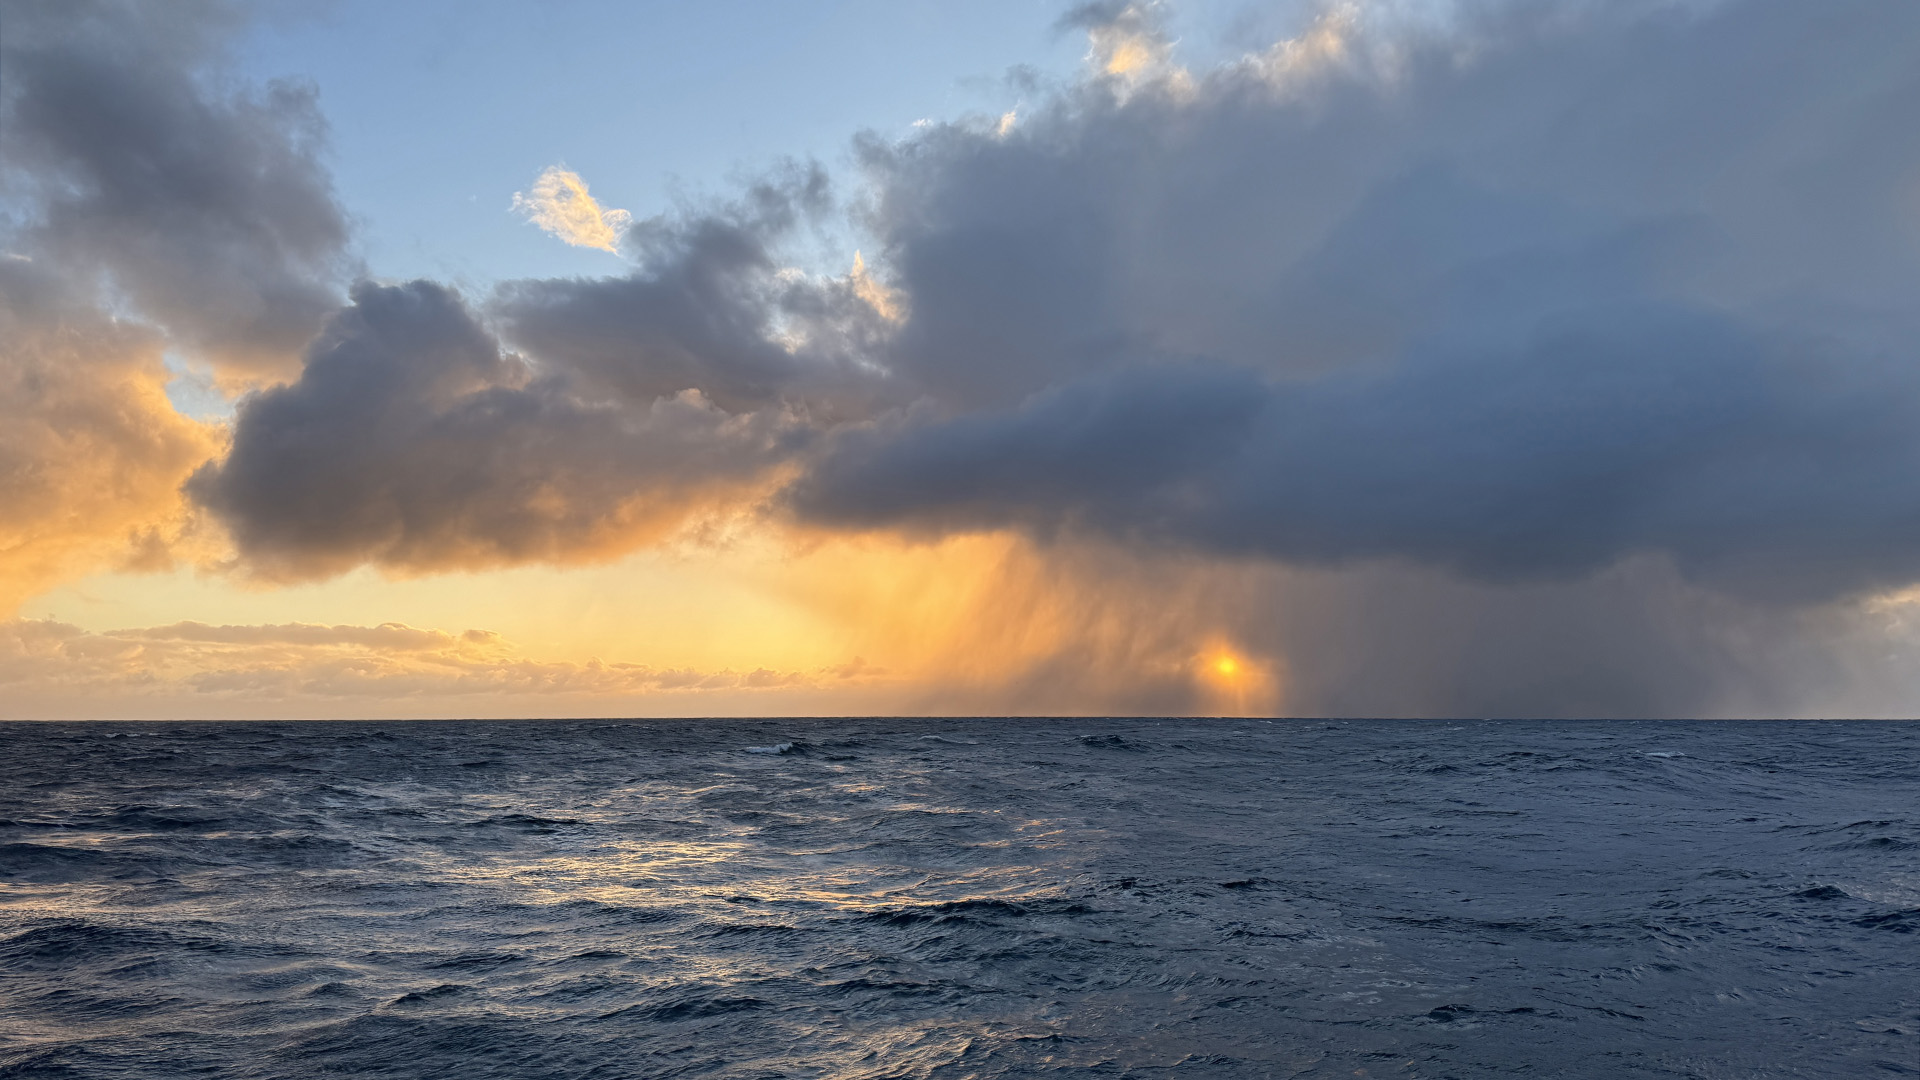 Another momentary shower veils the sunset over the Southern Ocean.